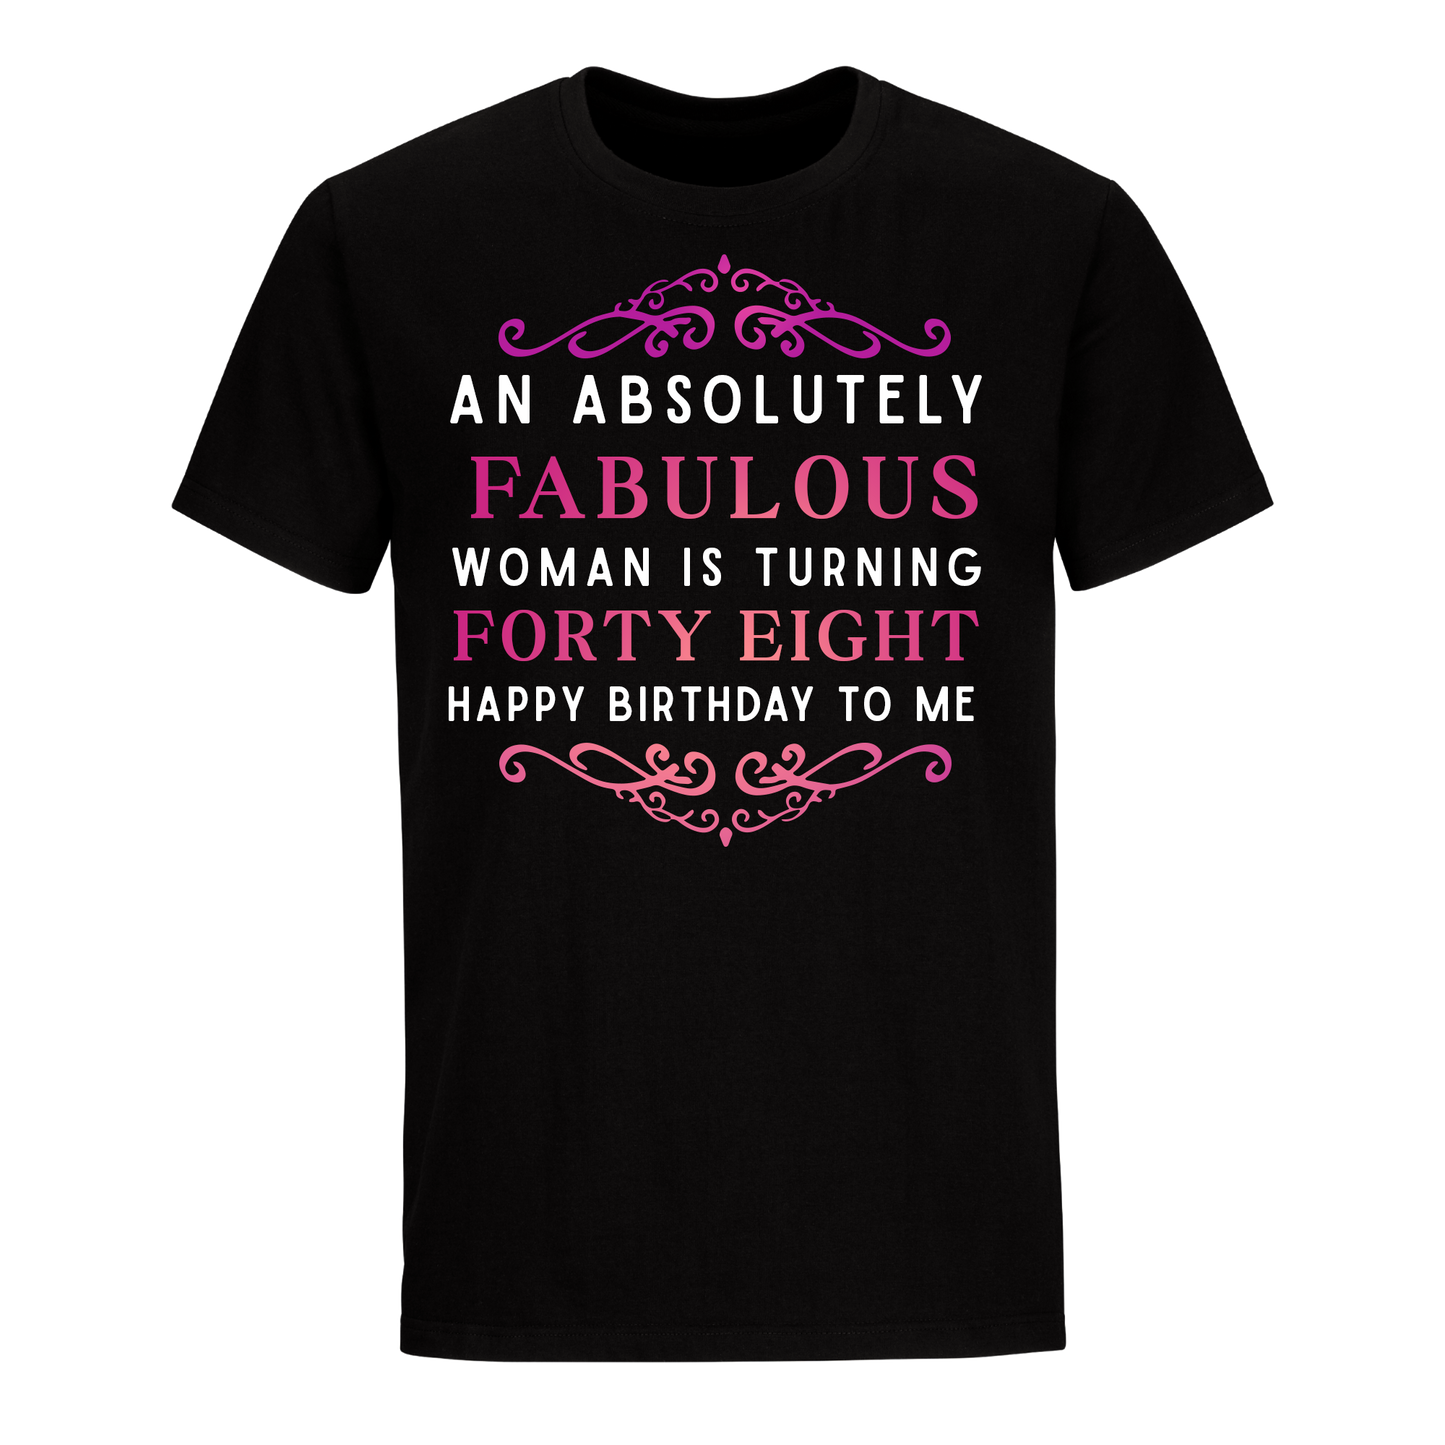 ABSOLUTELY FAB FORTY EIGHT UNISEX SHIRT